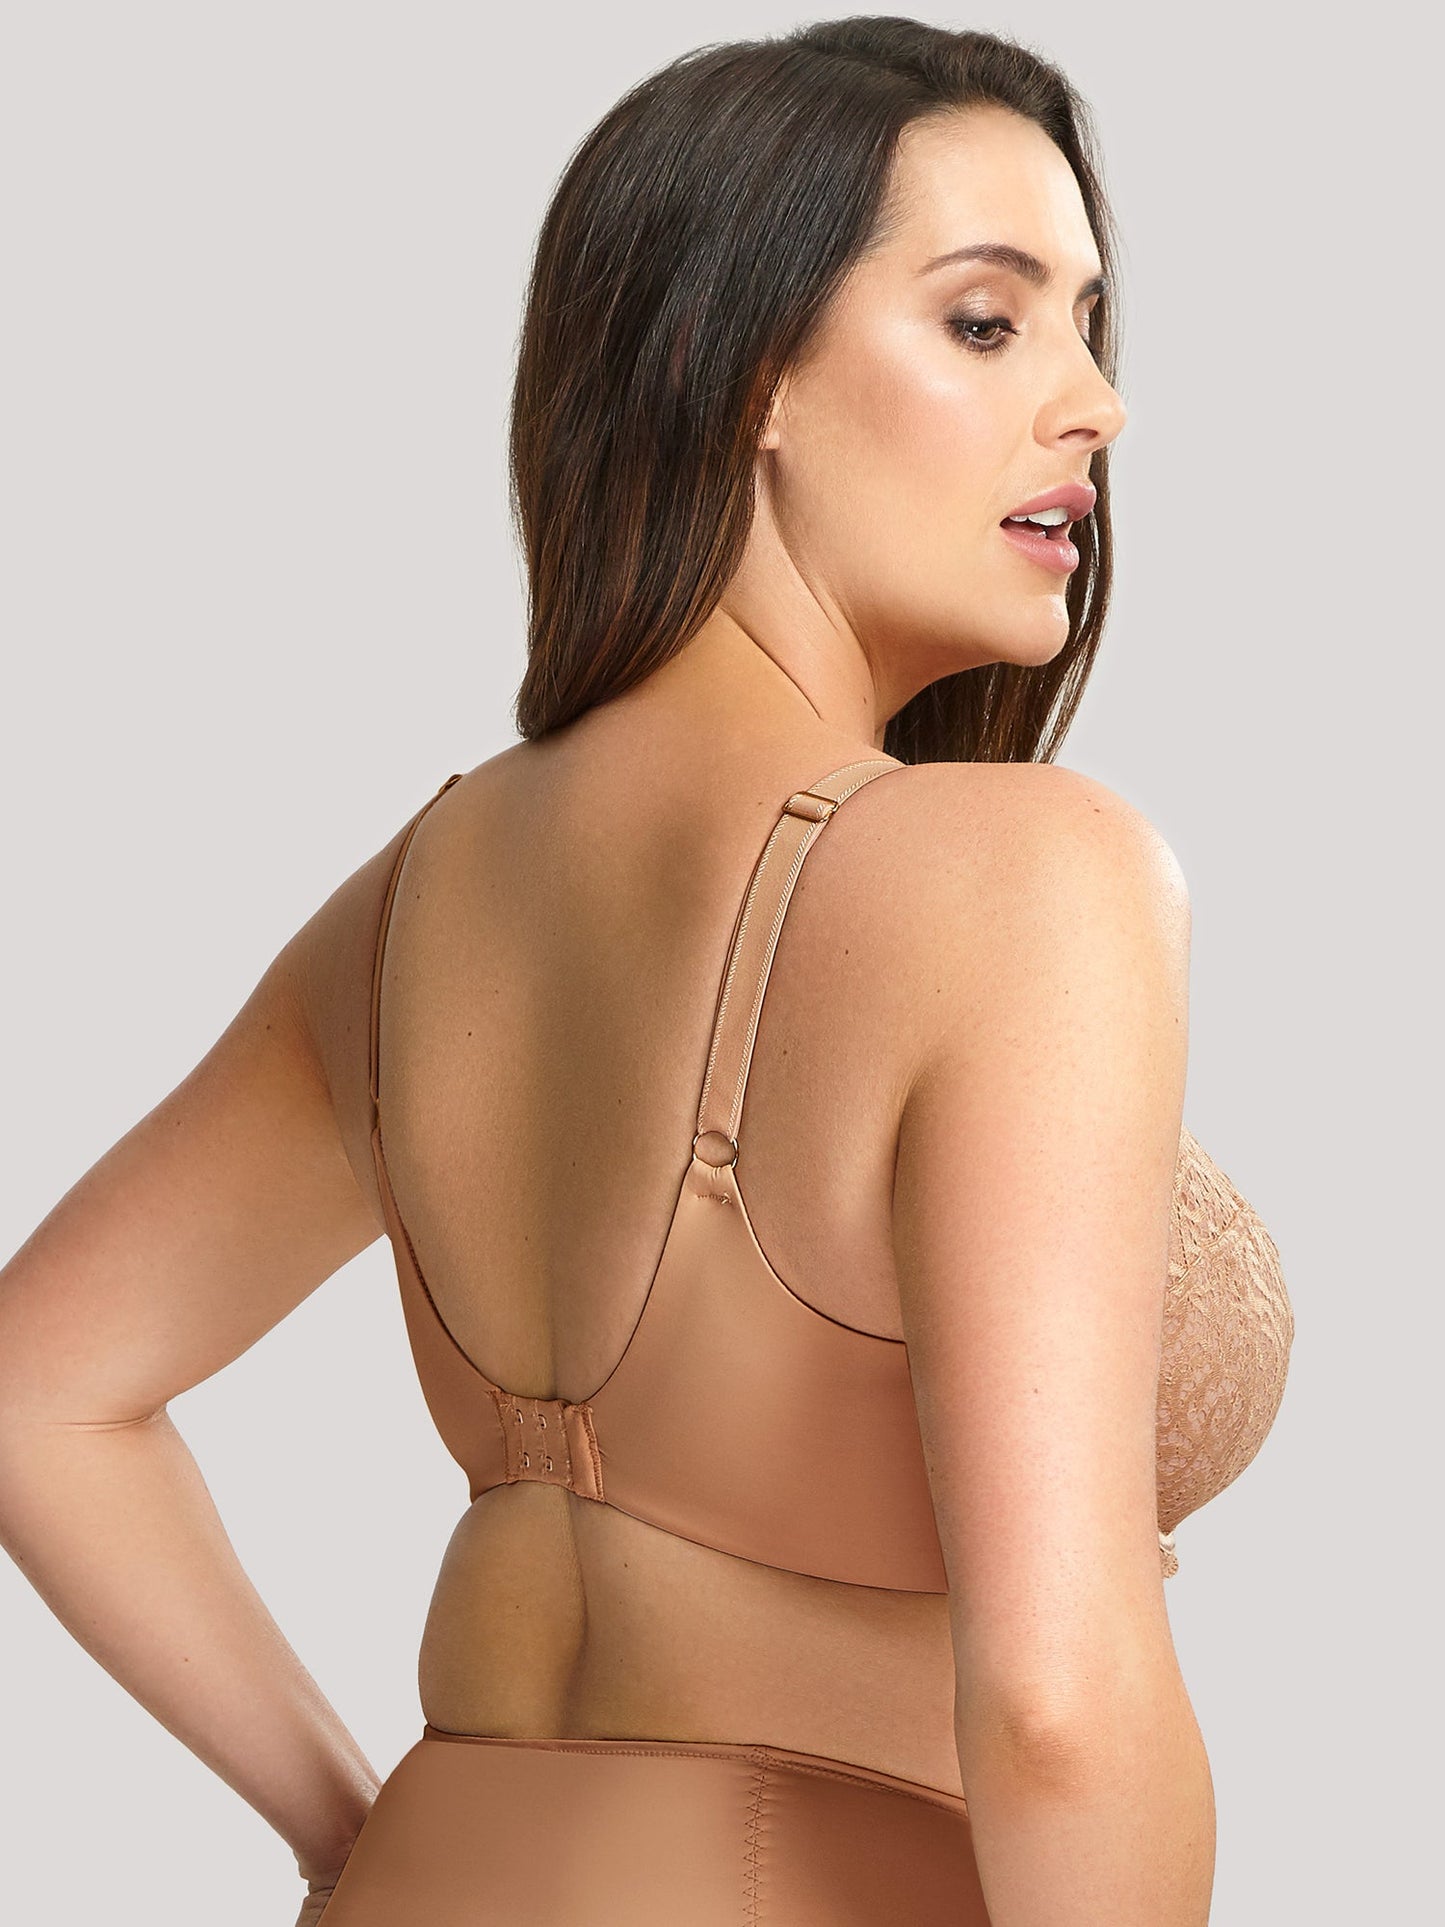 Estel Full Cup by Sculptrese - Pinned Up Bra Lounge